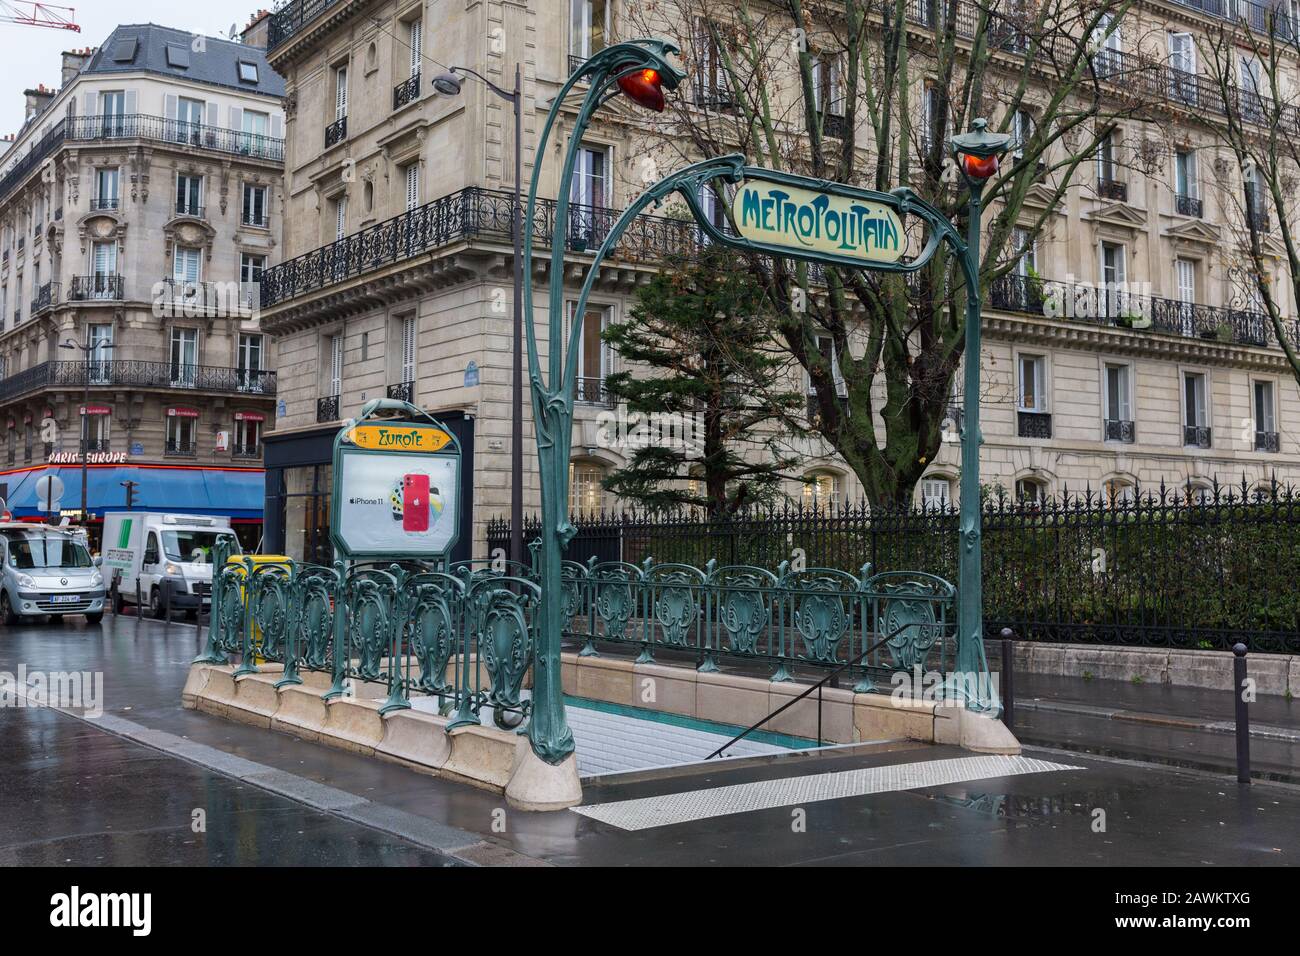 Entrance to the metropolitain - the parisian metro / subway system. The design of the railing around the gate & the sign above is called Art Nouveau. Stock Photo